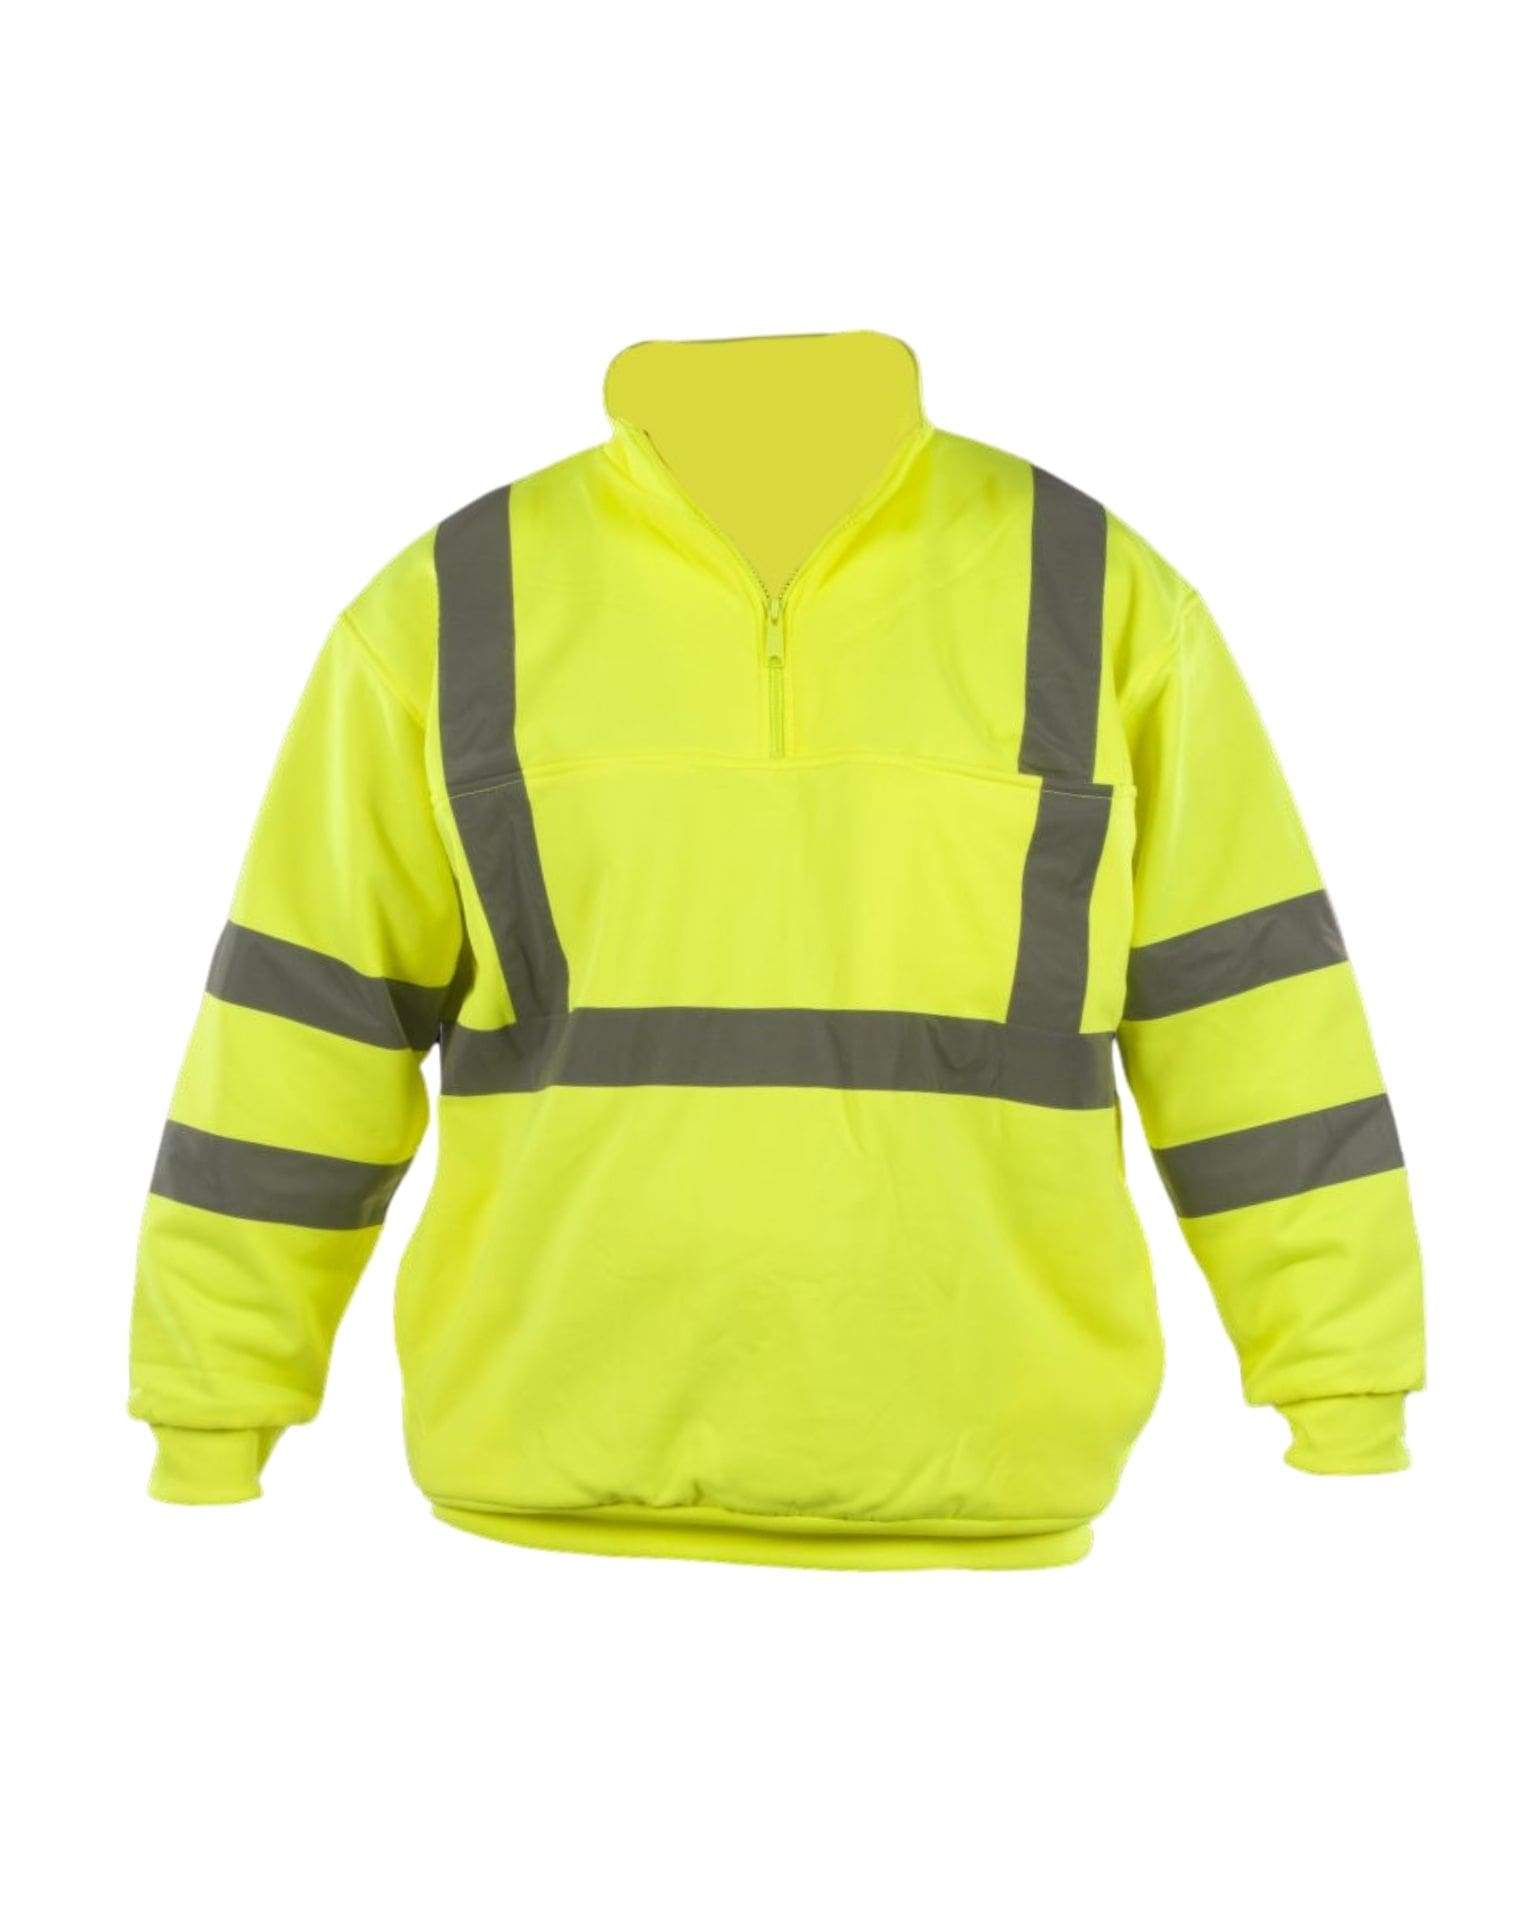 ANSI Class 3 High Visibility teflon fabric ribbed cuff and waistband 2 chest pockets 2 side pockets quarter zip sweatshirt by Utility Pro